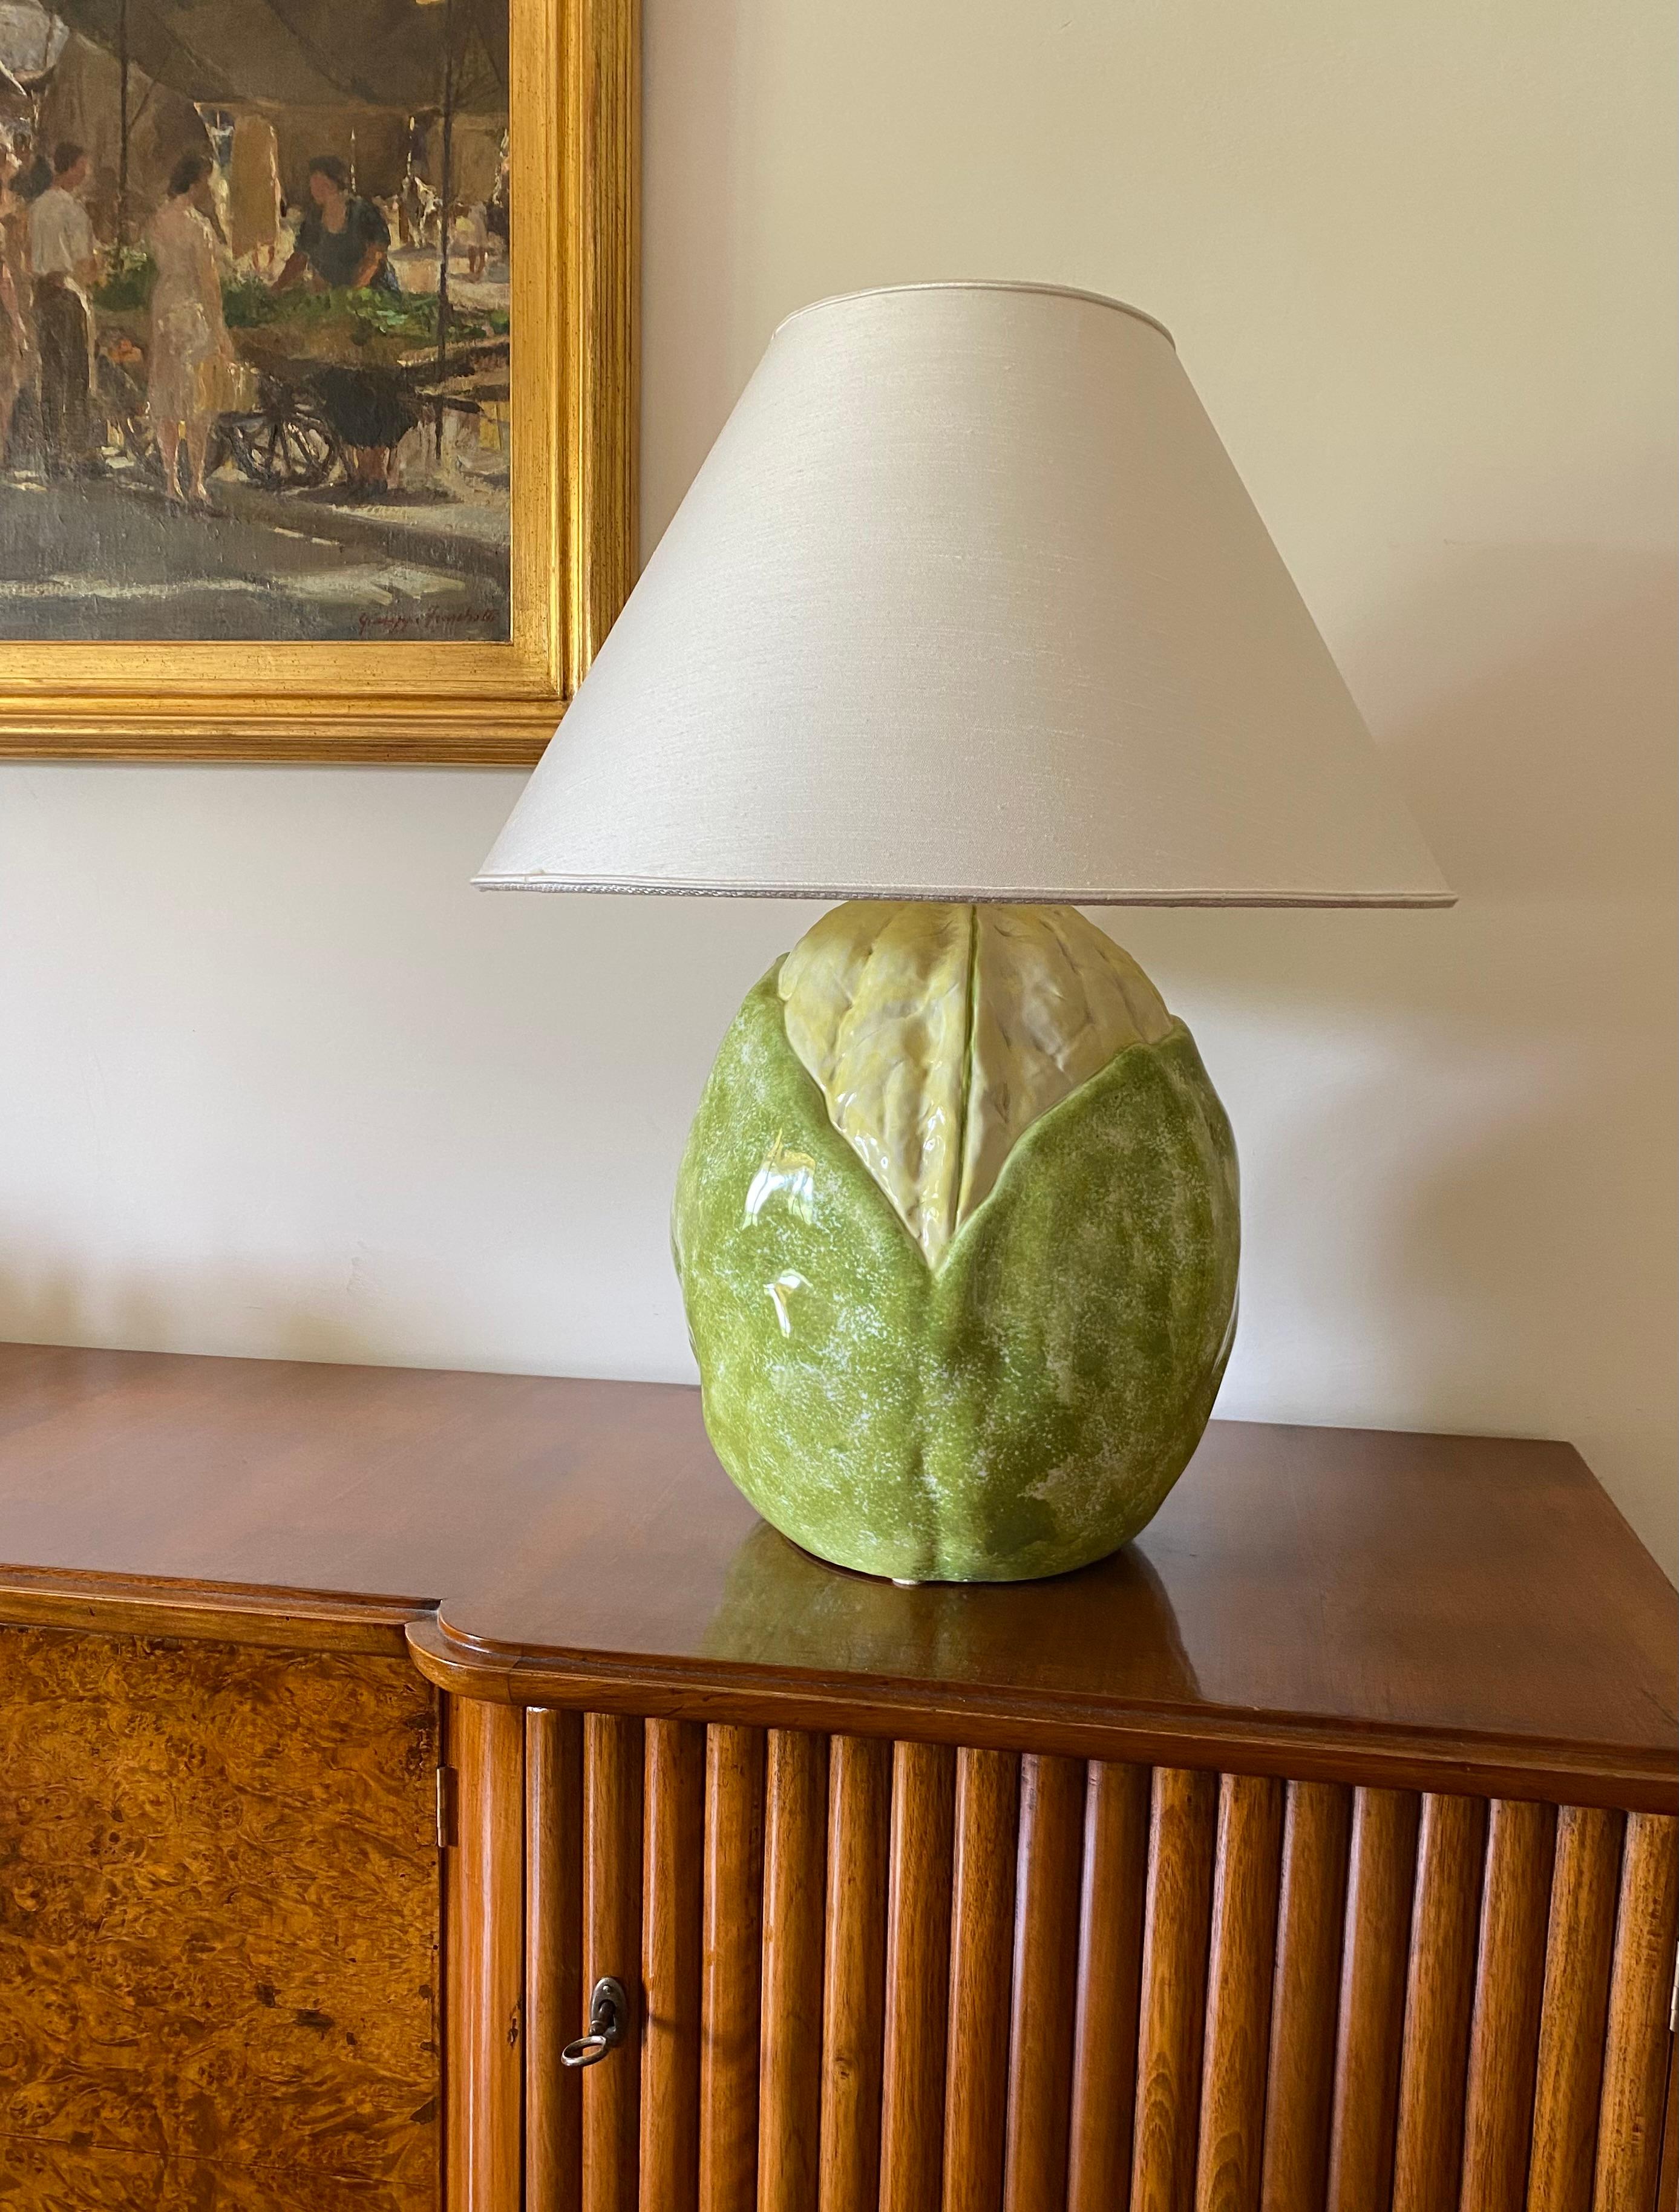 Monumental ceramic cauliflower-shaped lamp

Italy 1970s

Ceramic base in the shape of a vegetable, hand-made and hand-painted.

Lampshade not included.

H 45 cm - diam. 33 cm

Condition: excellent, consistent with age and use